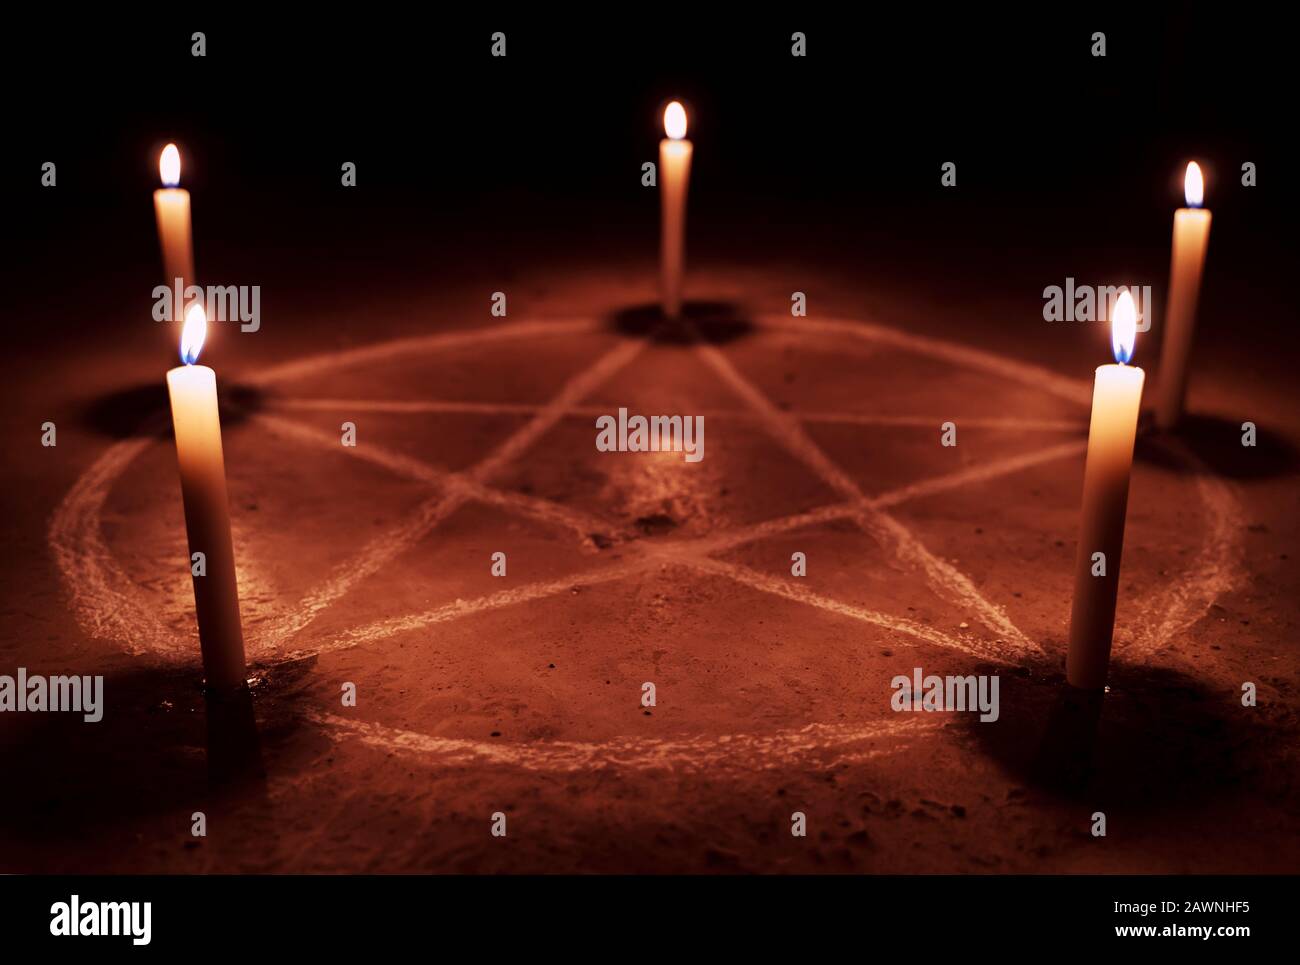 White pentagram symbol on concrete ground. Illuminated with candles. Dark background. Scary, mystical occultism Stock Photo